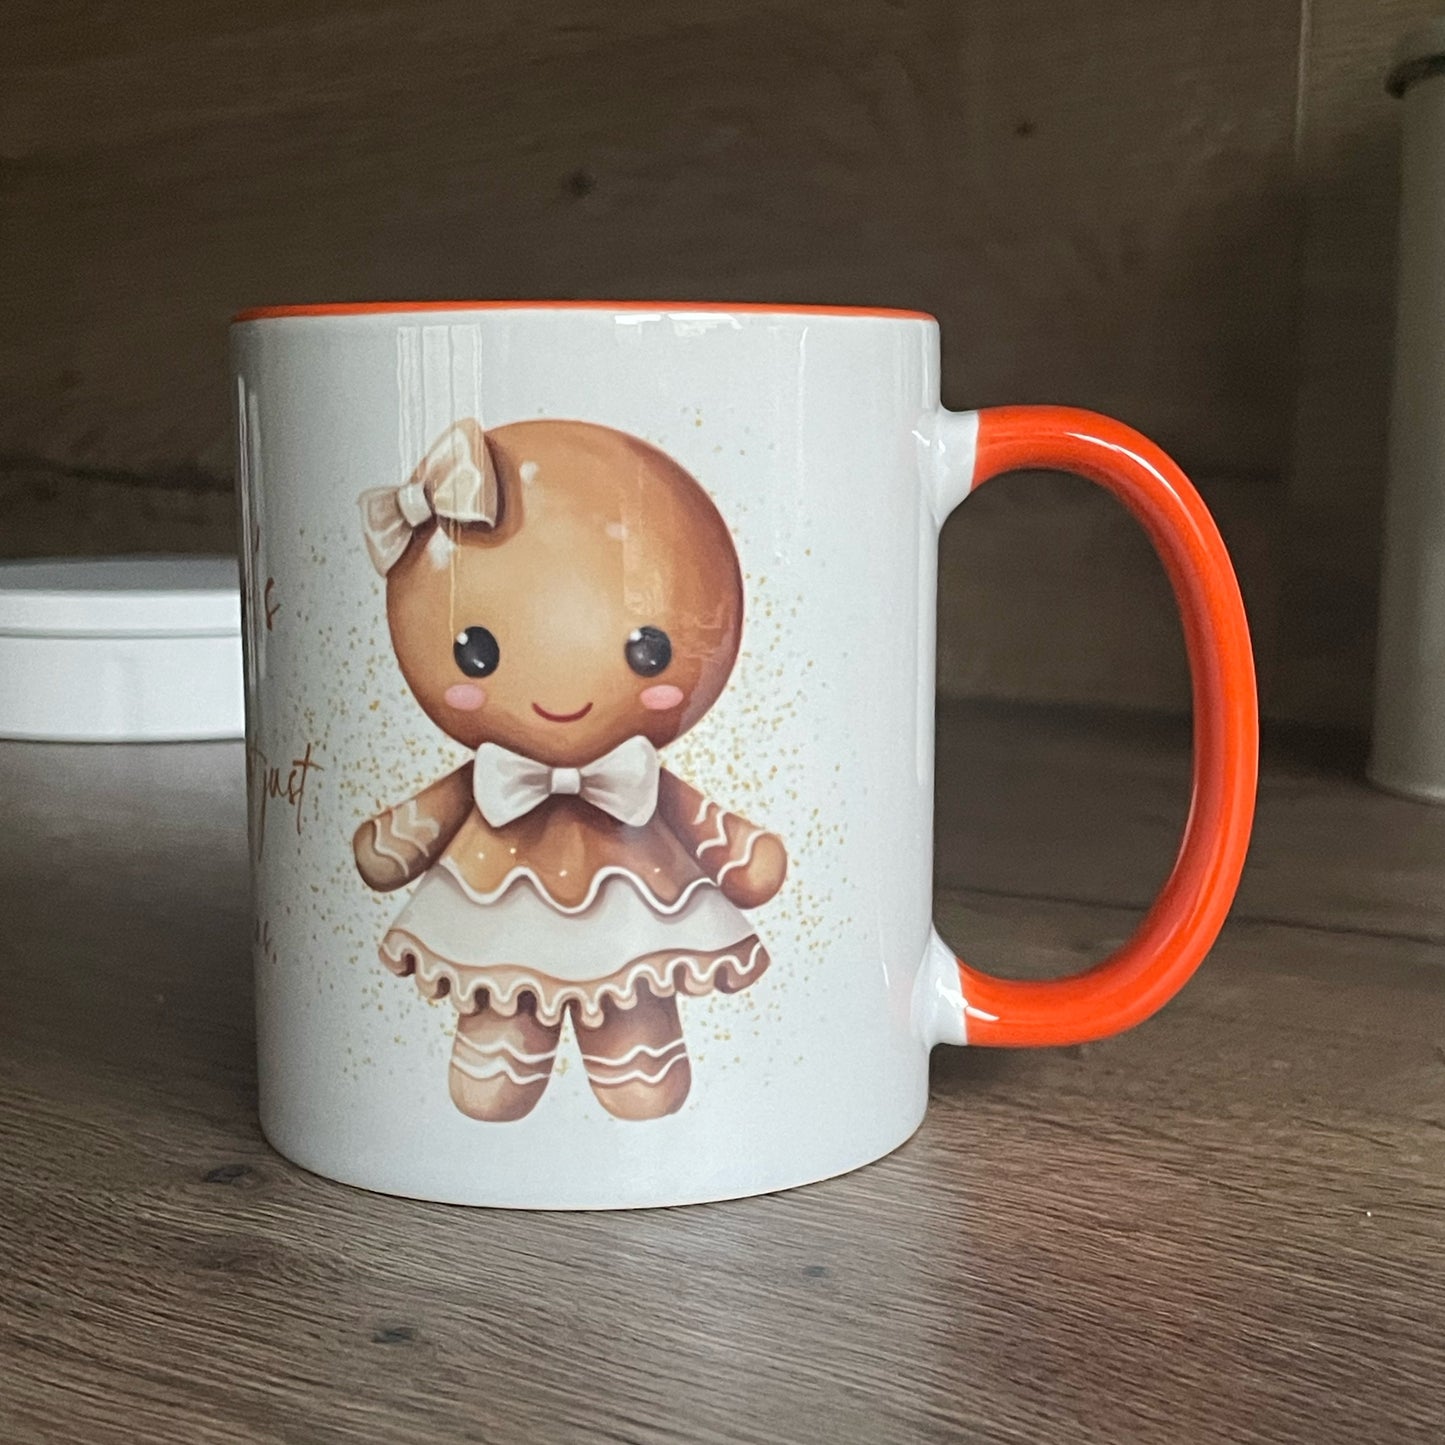 Gingerbread Mug | Gingers Are For Life